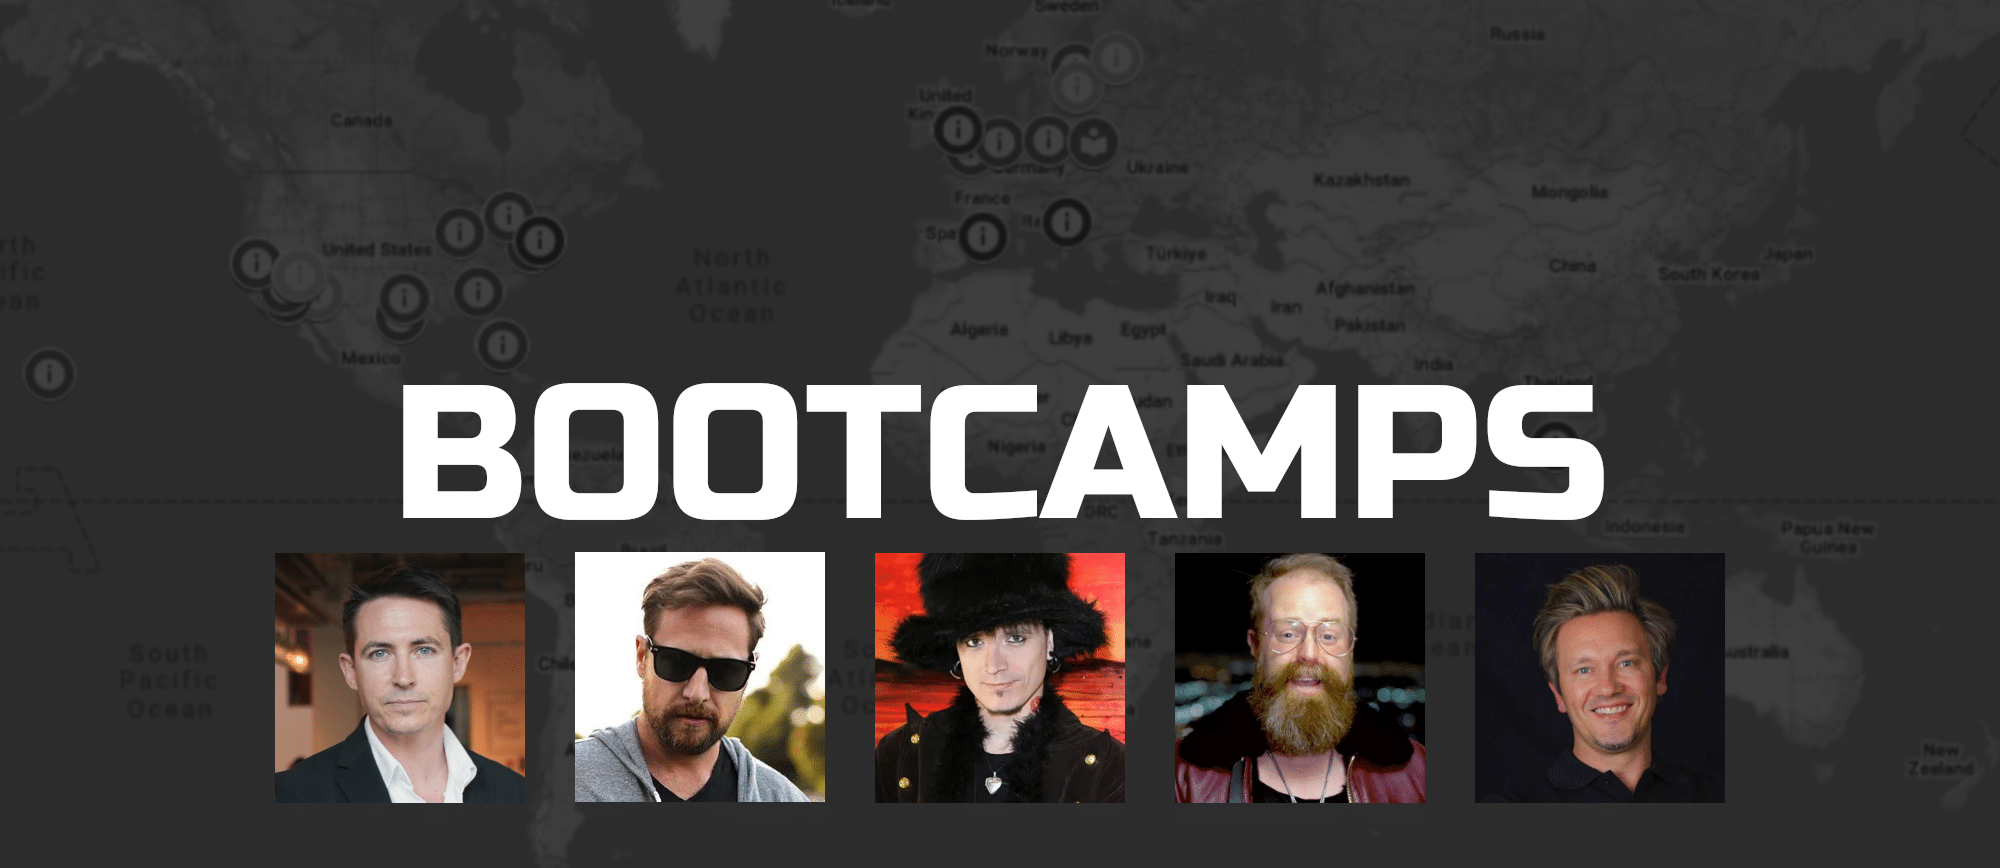 Bootcamps Self Mastery Co Real Social Dynamics RSD 4WN 4 Week Natural The Game Neil Strauss Mystery Erik Bootcamp 3SR 3 Second Rule Mystery Erik Von Markovik Jeff Allen PUA Pickup Artist Owen Cook Mike Ke Alex James Alex Social Pickup Artist Bootcamp